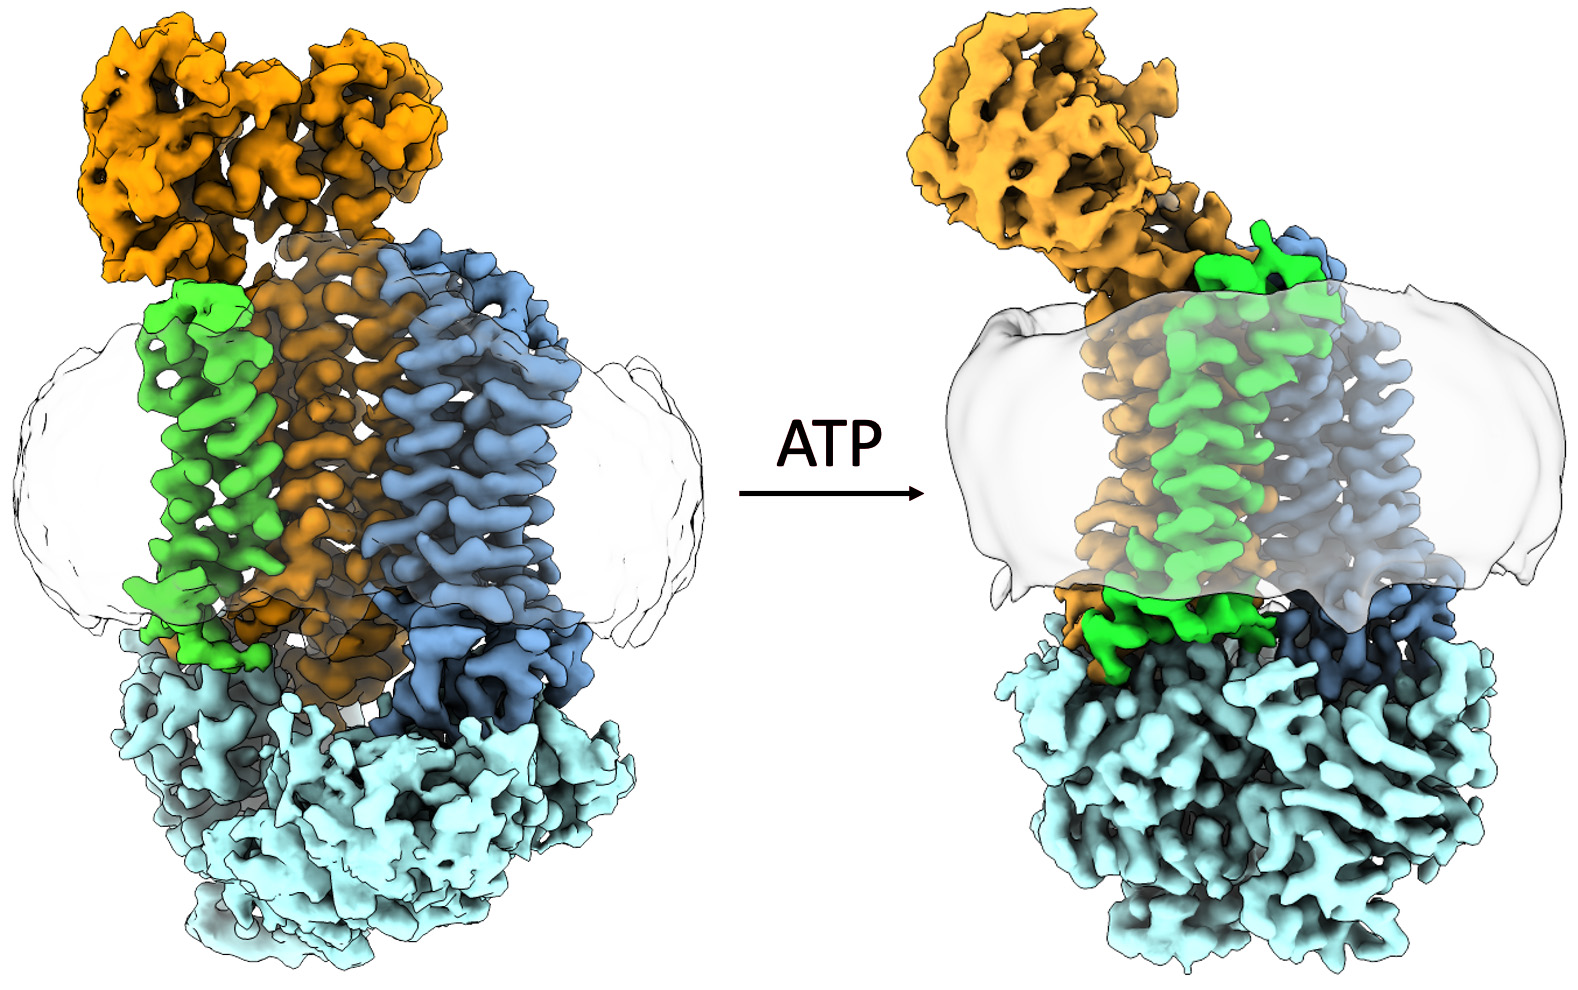 Computer renderings illustrate the atomic structure of a protein implicated in antibiotic resistance in orange, light blue, green and dark blue. On the left, the first rendering looks like a tube that’s open on top and closed on the bottom by the light blue segment and the remaining segments forming the walls. An arrow points to a second structure on the right showing how the protein changes in the presence of ATP. The walls of the tube appear to have twisted closed, giving the protein the appearance of a chicken wing or upside down ice cream cone.